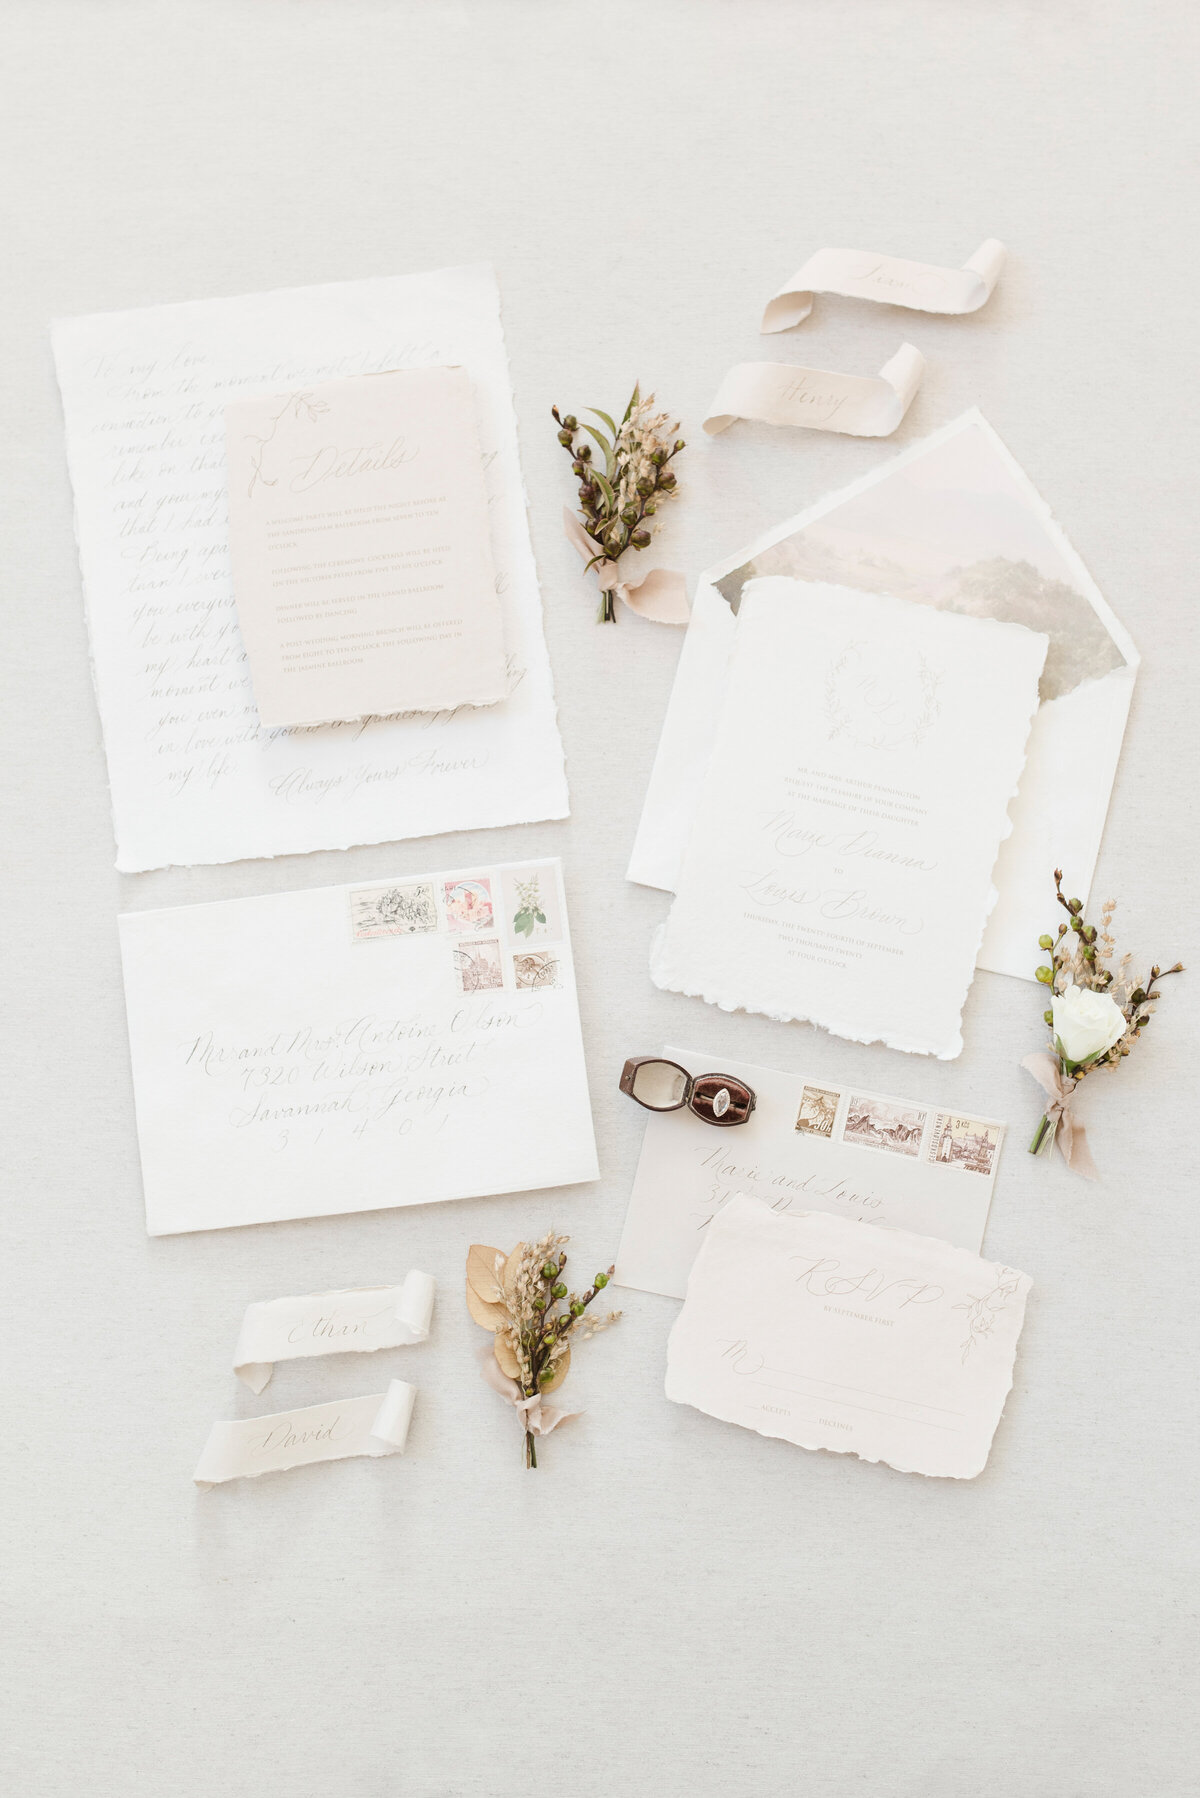 sharpe-stationery-and-printing-cotton-paper-invitation-suite